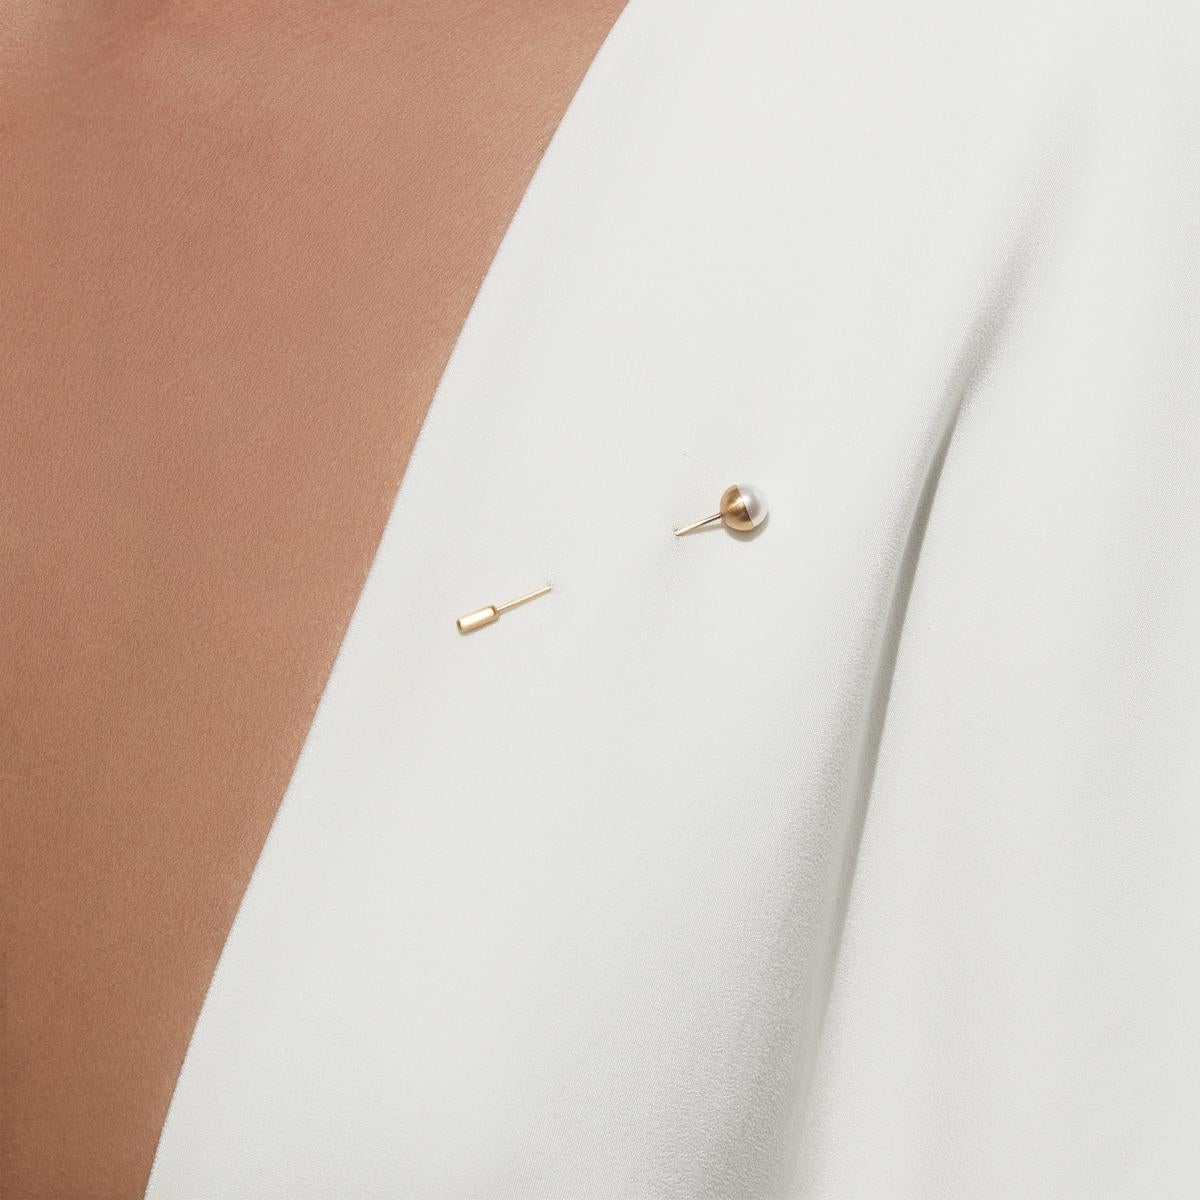 This lapel pin features a pearl set in a half sphere of gold at a 0 degree angle. Comes with an 18K yellow gold pin stopper. 

18 Karat Yellow Gold Akoya Pearl Lapel Pin 0°
Pin length: 43mm
Stopper: 7mm
Akoya pearl: 7mm
This item is made-to-order